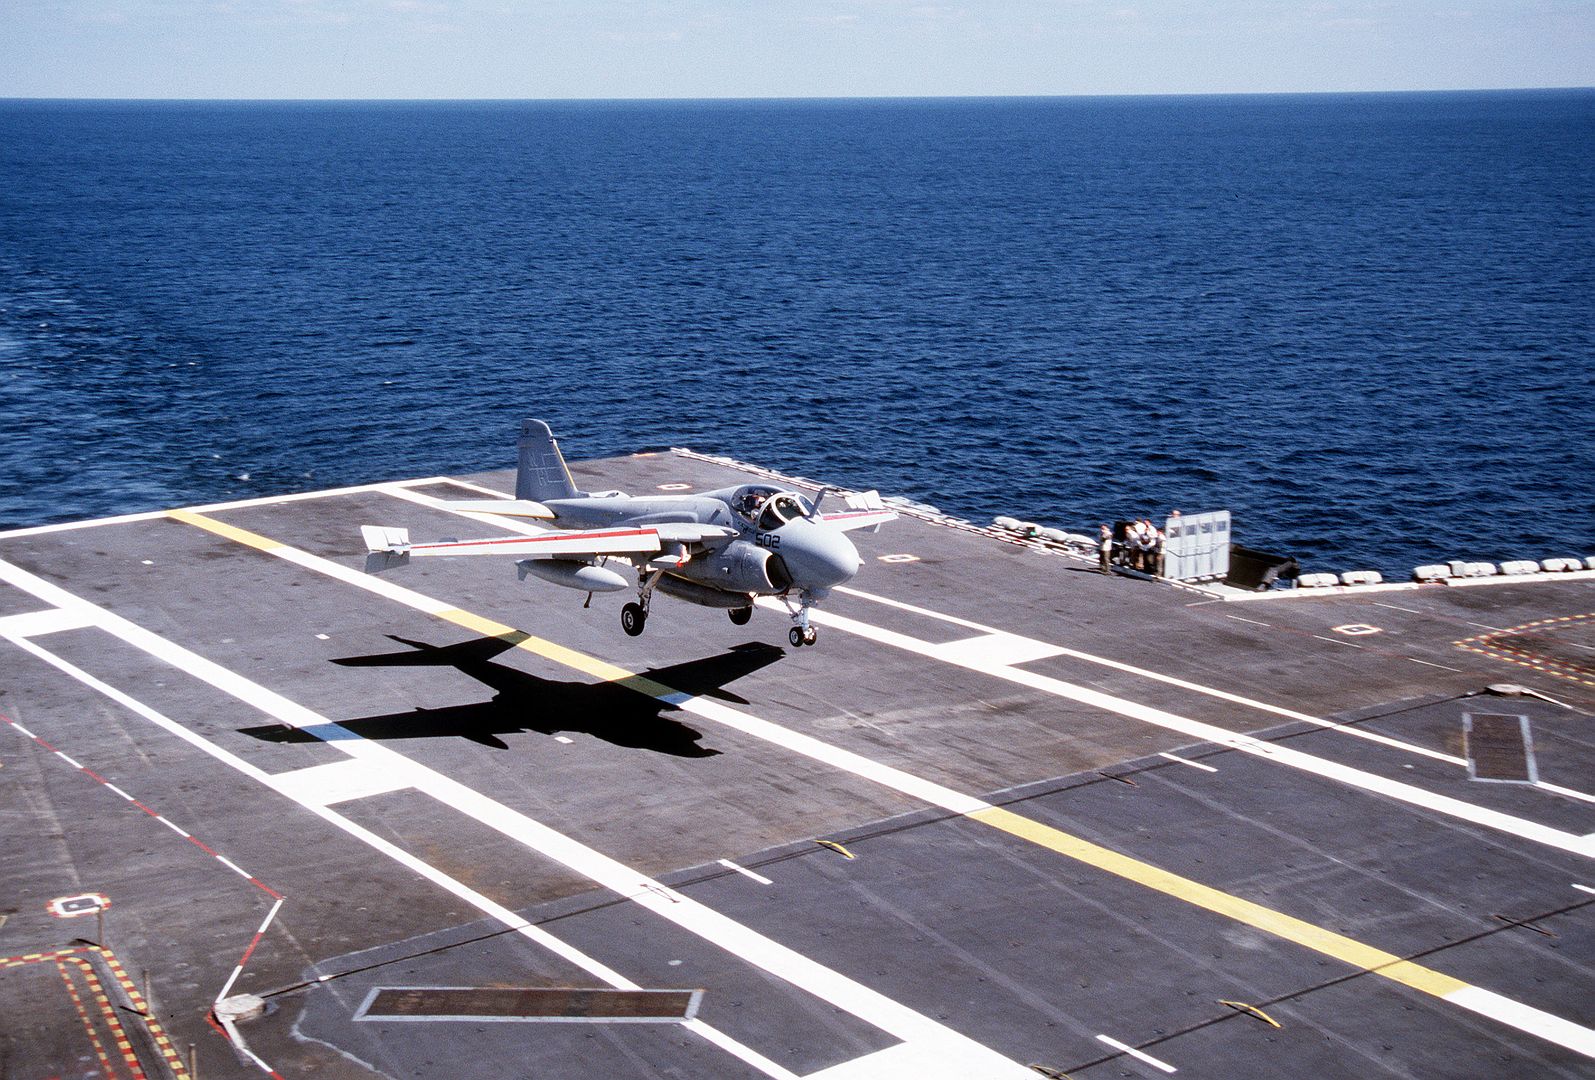 An Attack Squadron 95 A 6E Intruder Aircraft Comes In For A Landing On The Flight Deck Of The Nuclear Powered Aircraft Carrier USS ABRAHAM LINCOLN